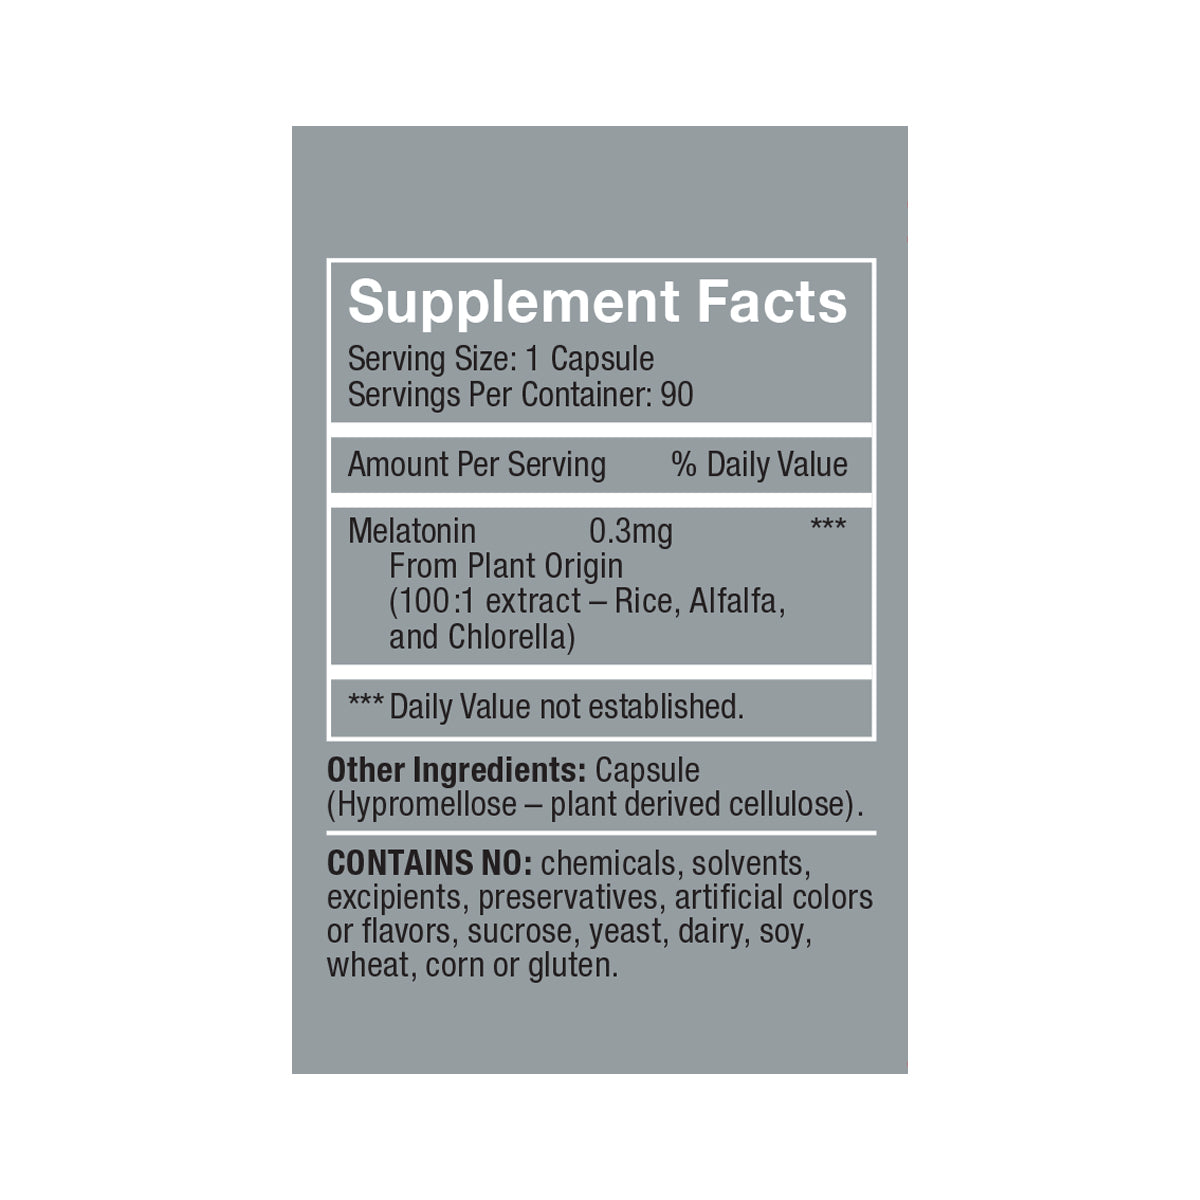 Herbatonin 0.3mg side panel product box supplement facts, white/black text on dark gray background: Serving size 1 capsule, servings per container 90, melatonin 0.3mg from plant origin (100:1 extract rice, alfalfa, and chlorella), other ingredient is capsule (hypromellose-plant derived cellulose), contains no chemicals, solvents, excipients, preservatives, artificial colors or flavors, sucrose, yeast, dairy, soy, wheat, corn or gluten